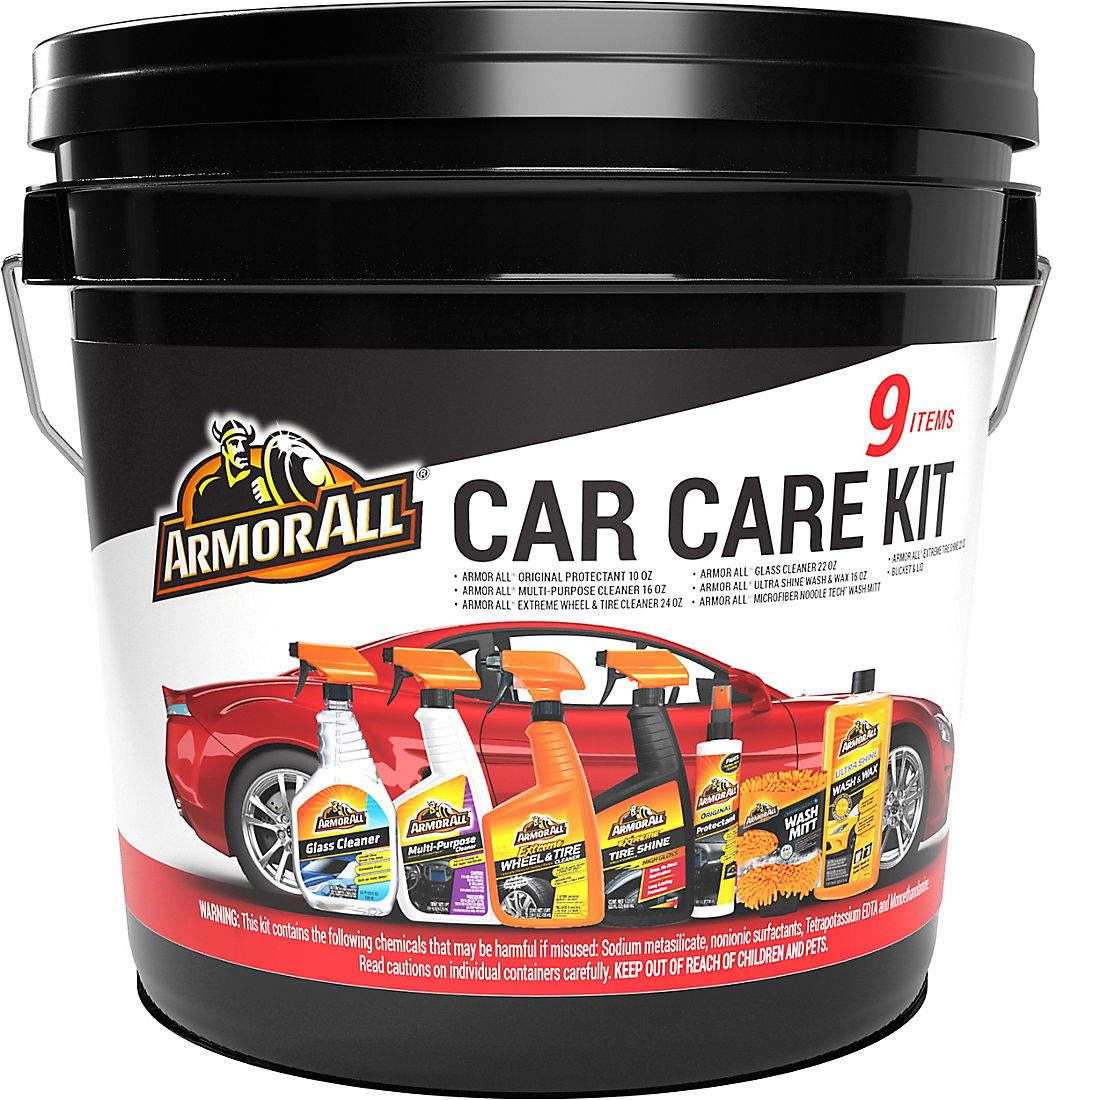 Armor All Holiday Car Cleaning Kit, 10-Piece Holiday Gift Set